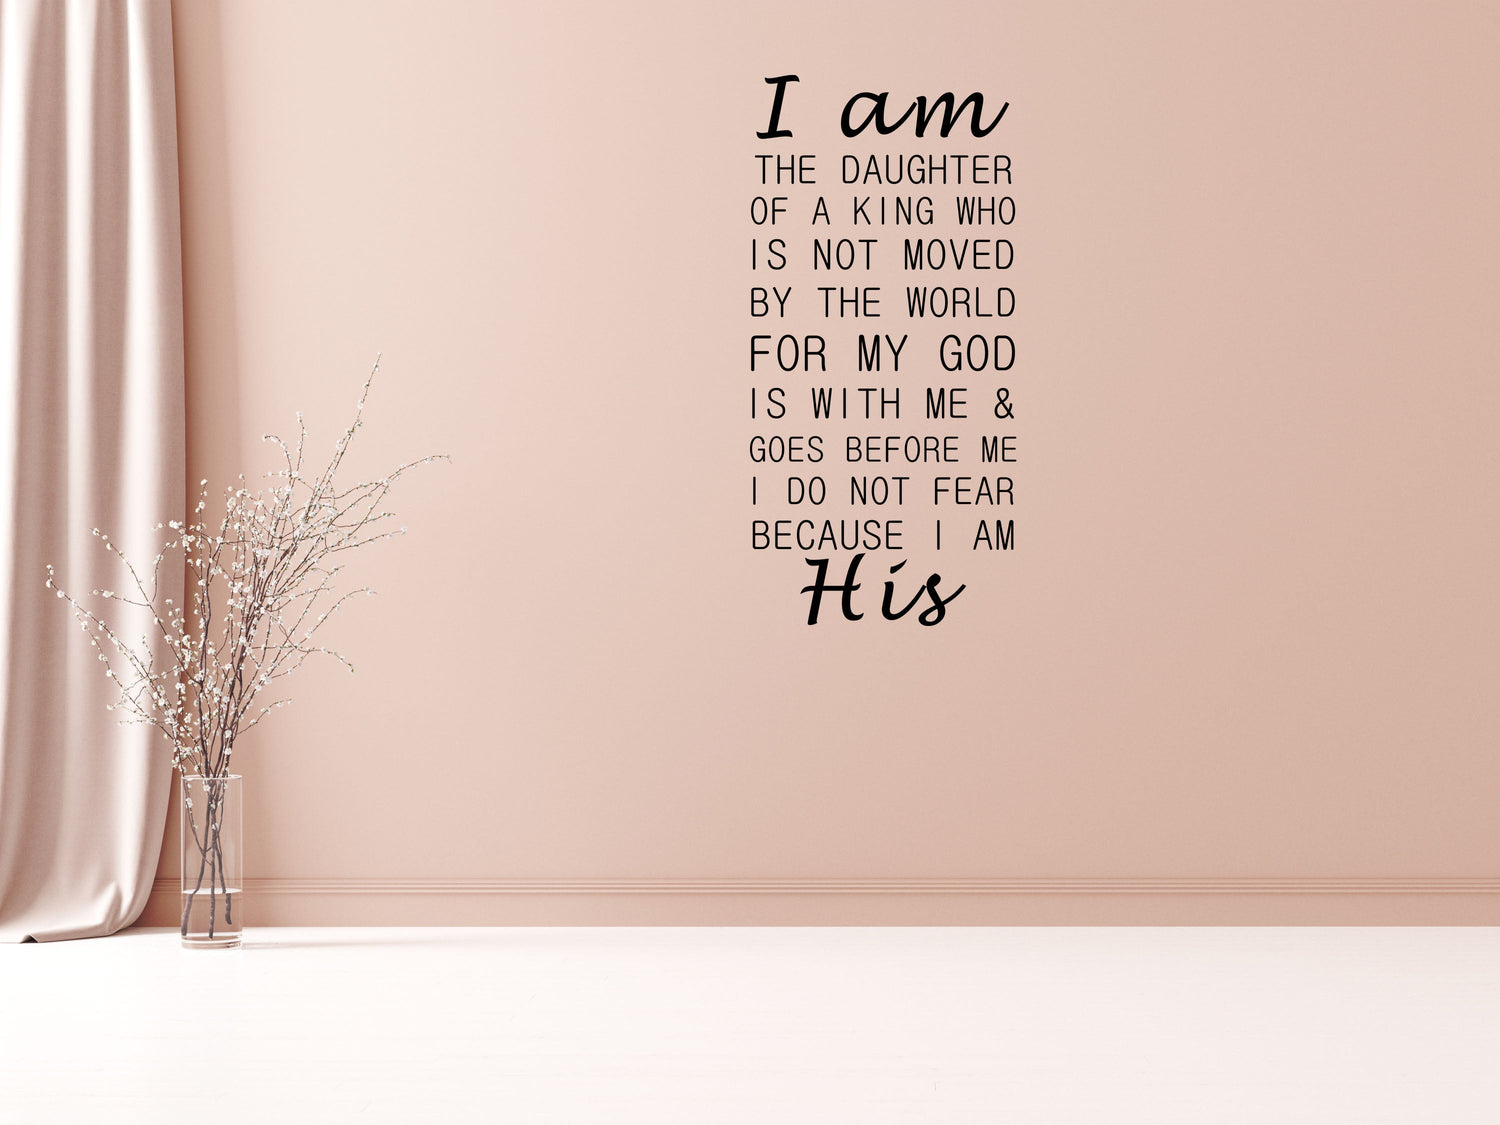 I Am The Daughter Of A King - Inspirational Wall Decals Vinyl Wall Decal Inspirational Wall Signs 